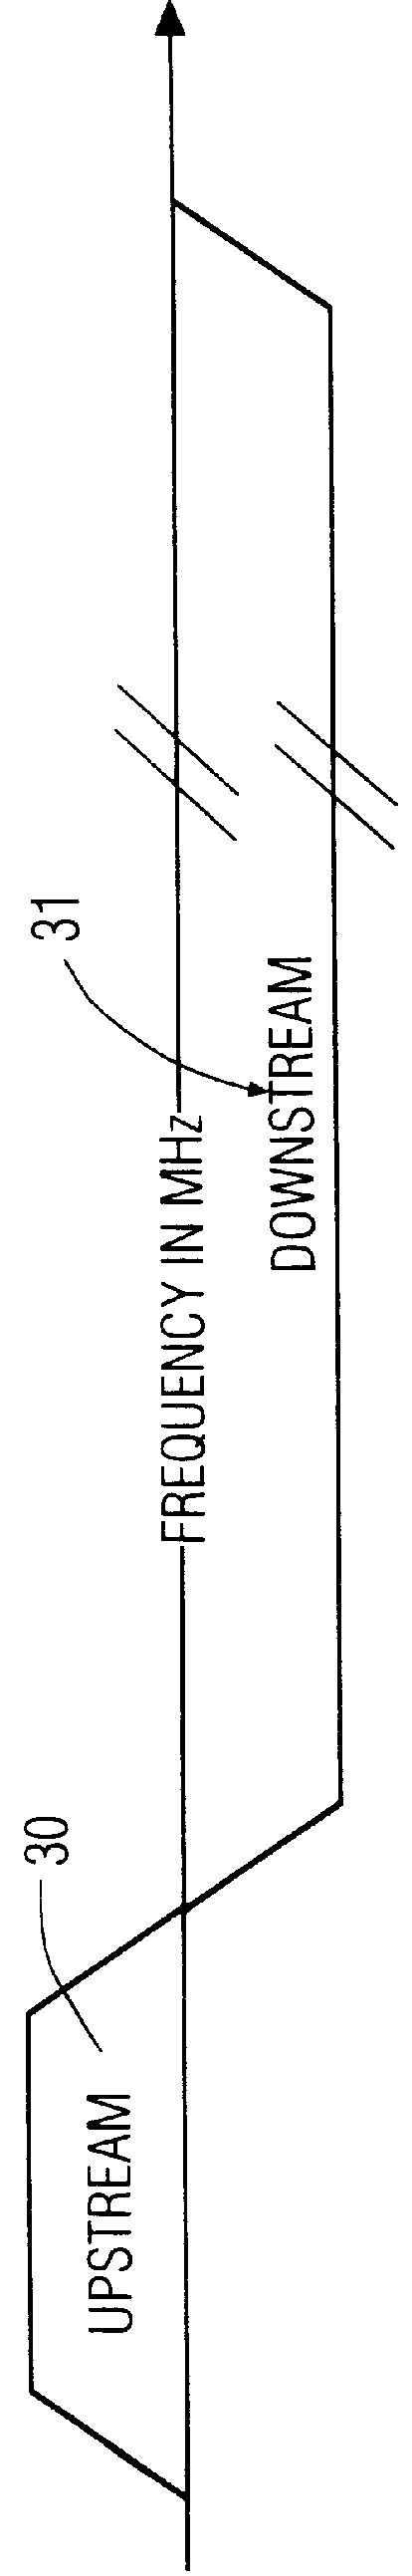 Method and apparatus for improved time division multiple access (TDMA) communication